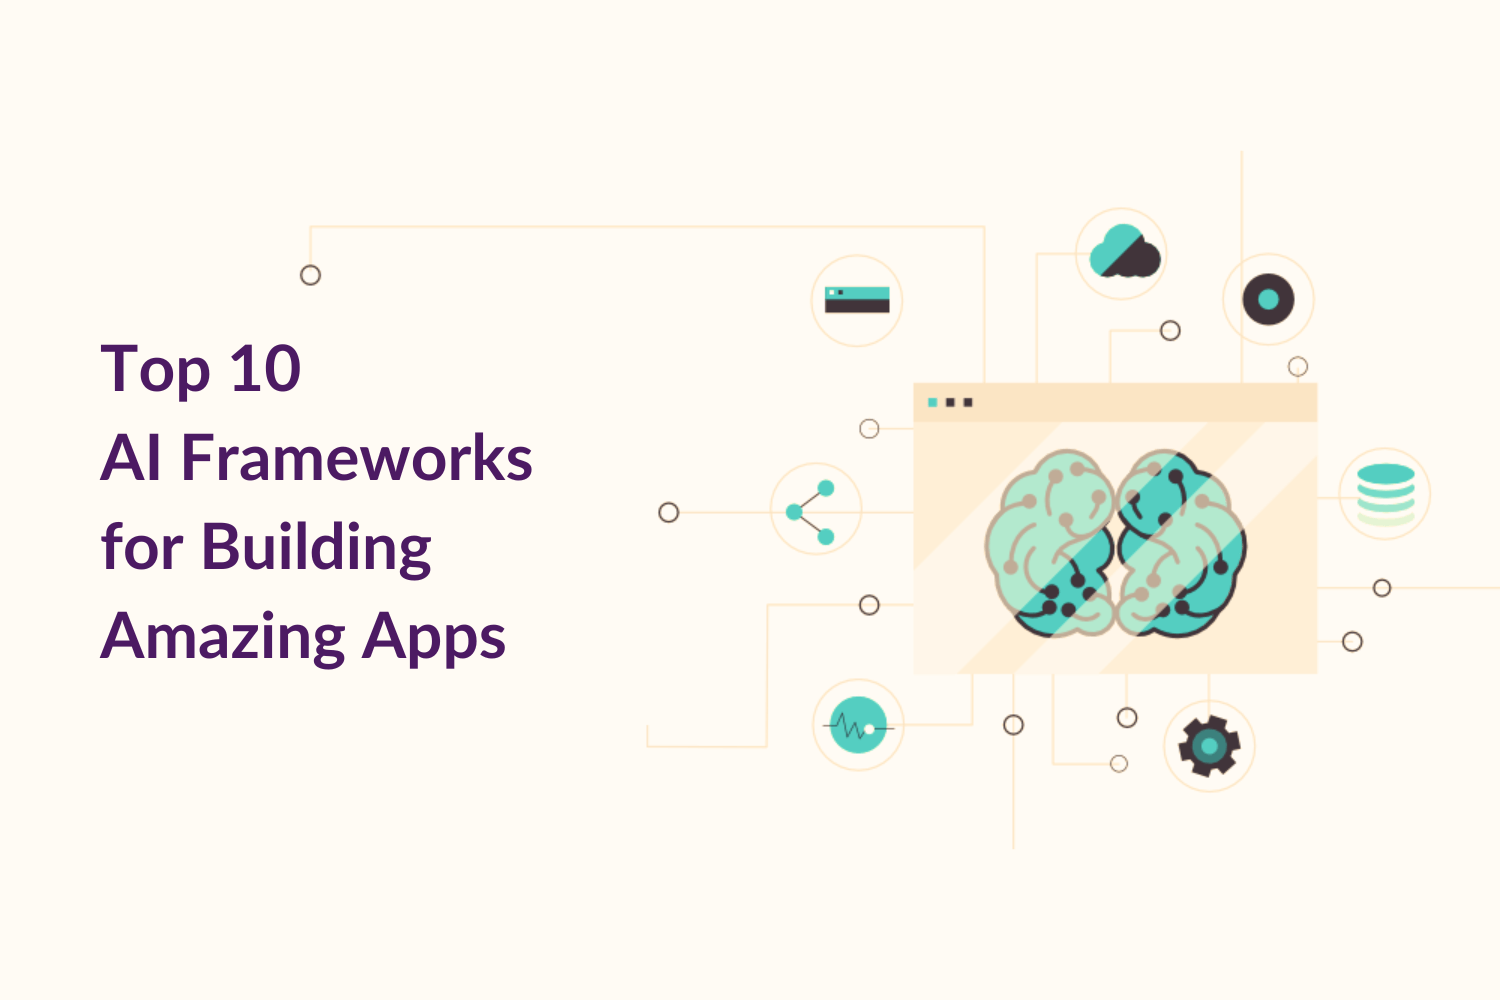 Top 10 AI Frameworks for Building Amazing Apps